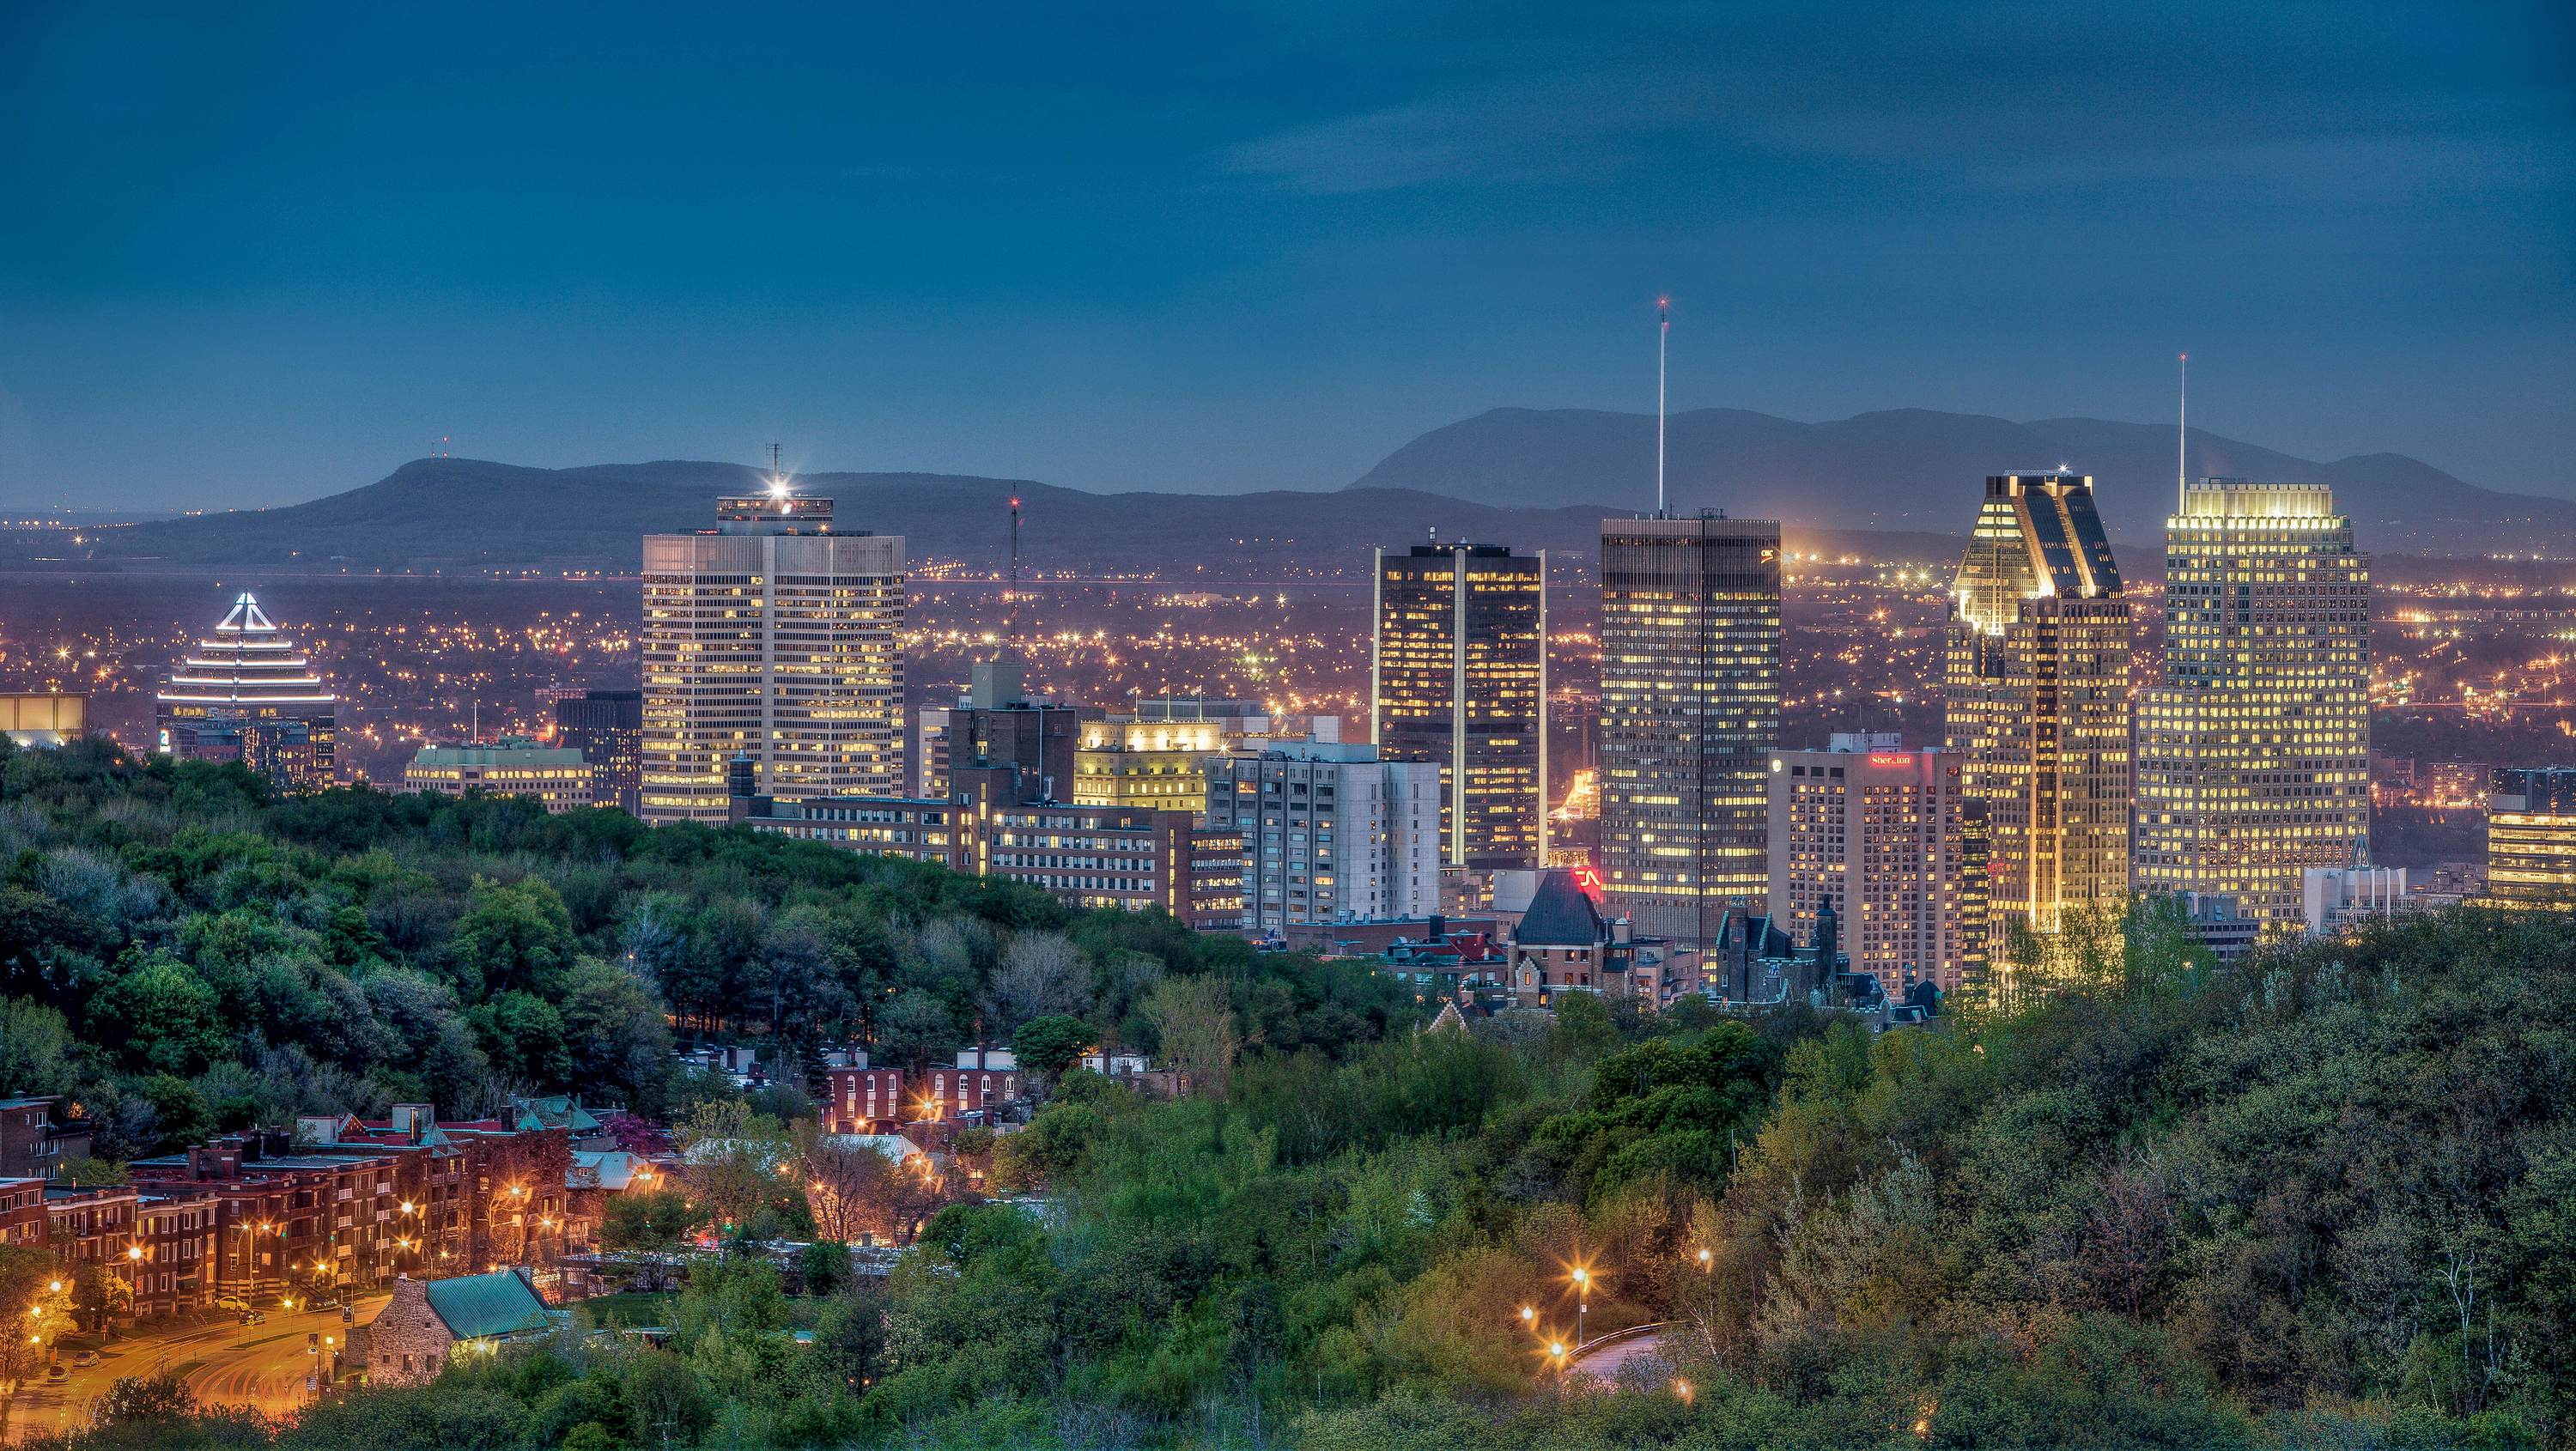 The Best Neighborhoods of the City: Where to Stay in Montreal in 2021.